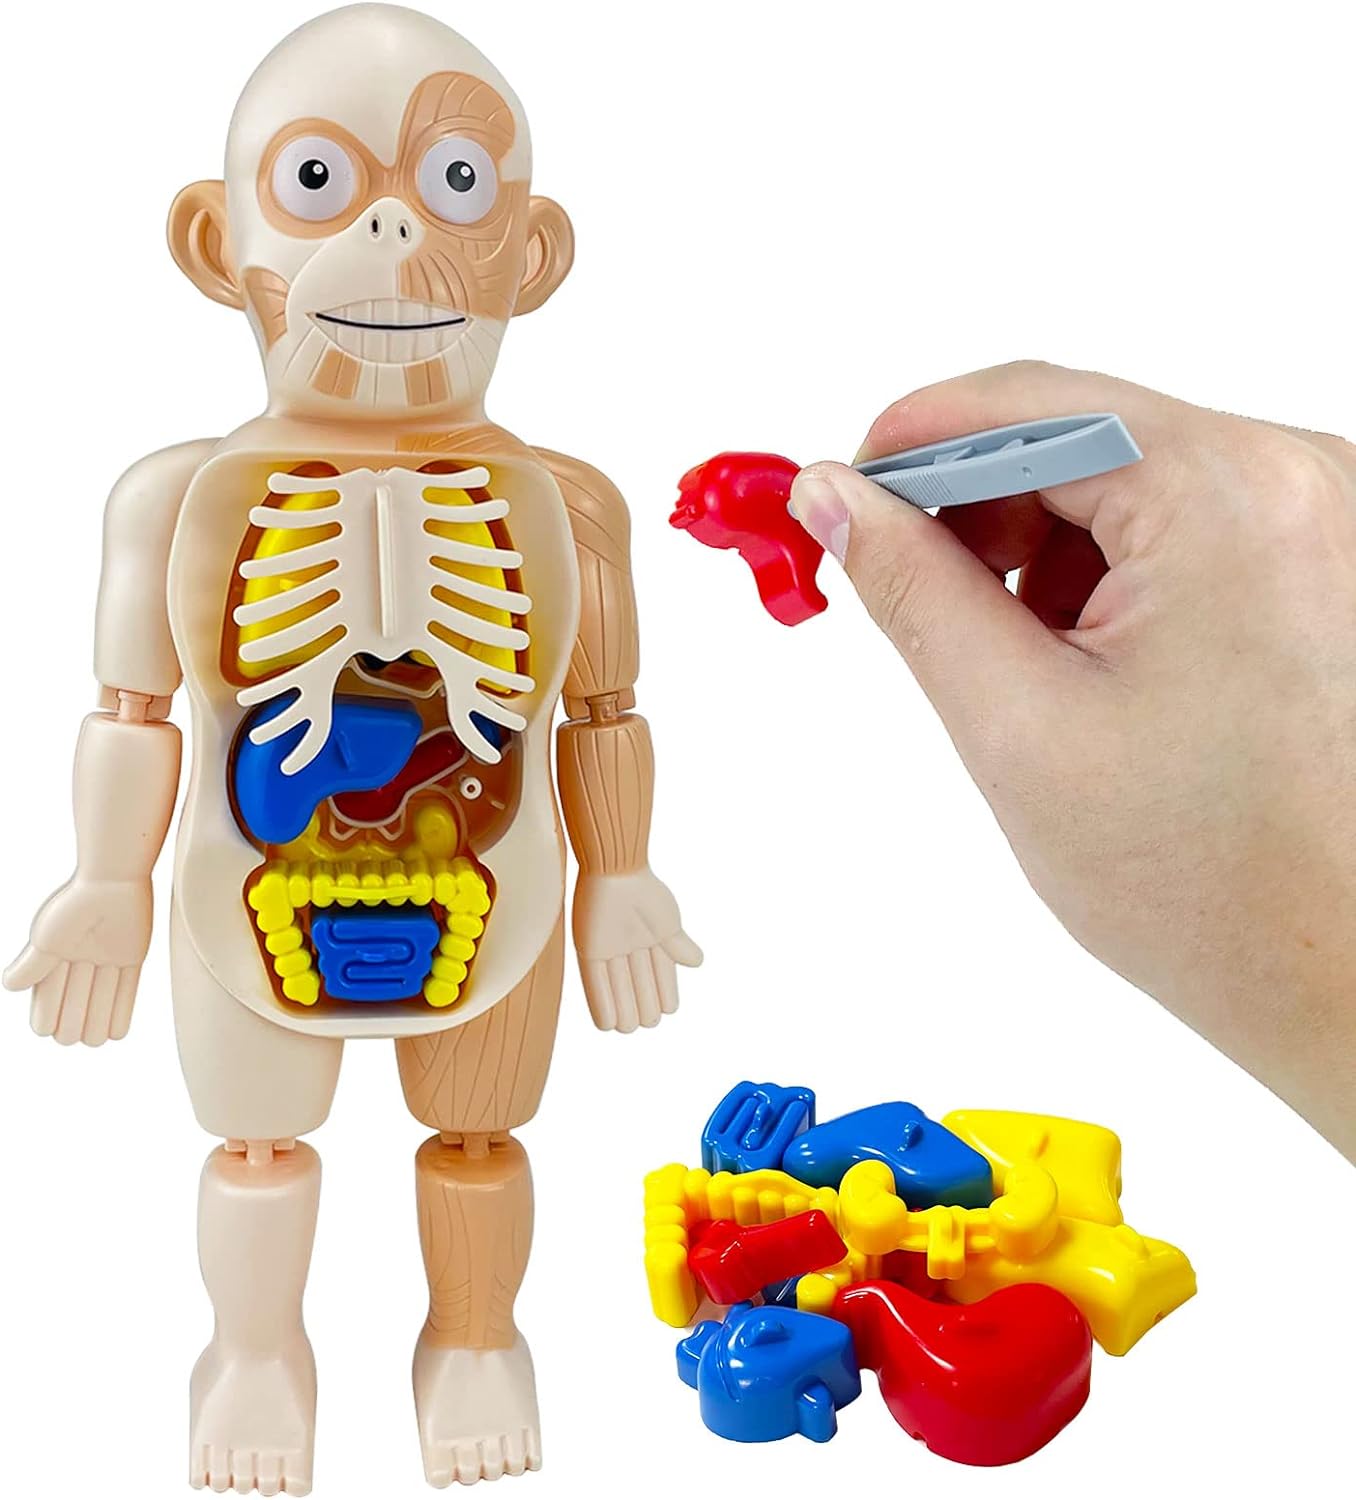 Kids Early Educational Learning Toys Human Organs Model